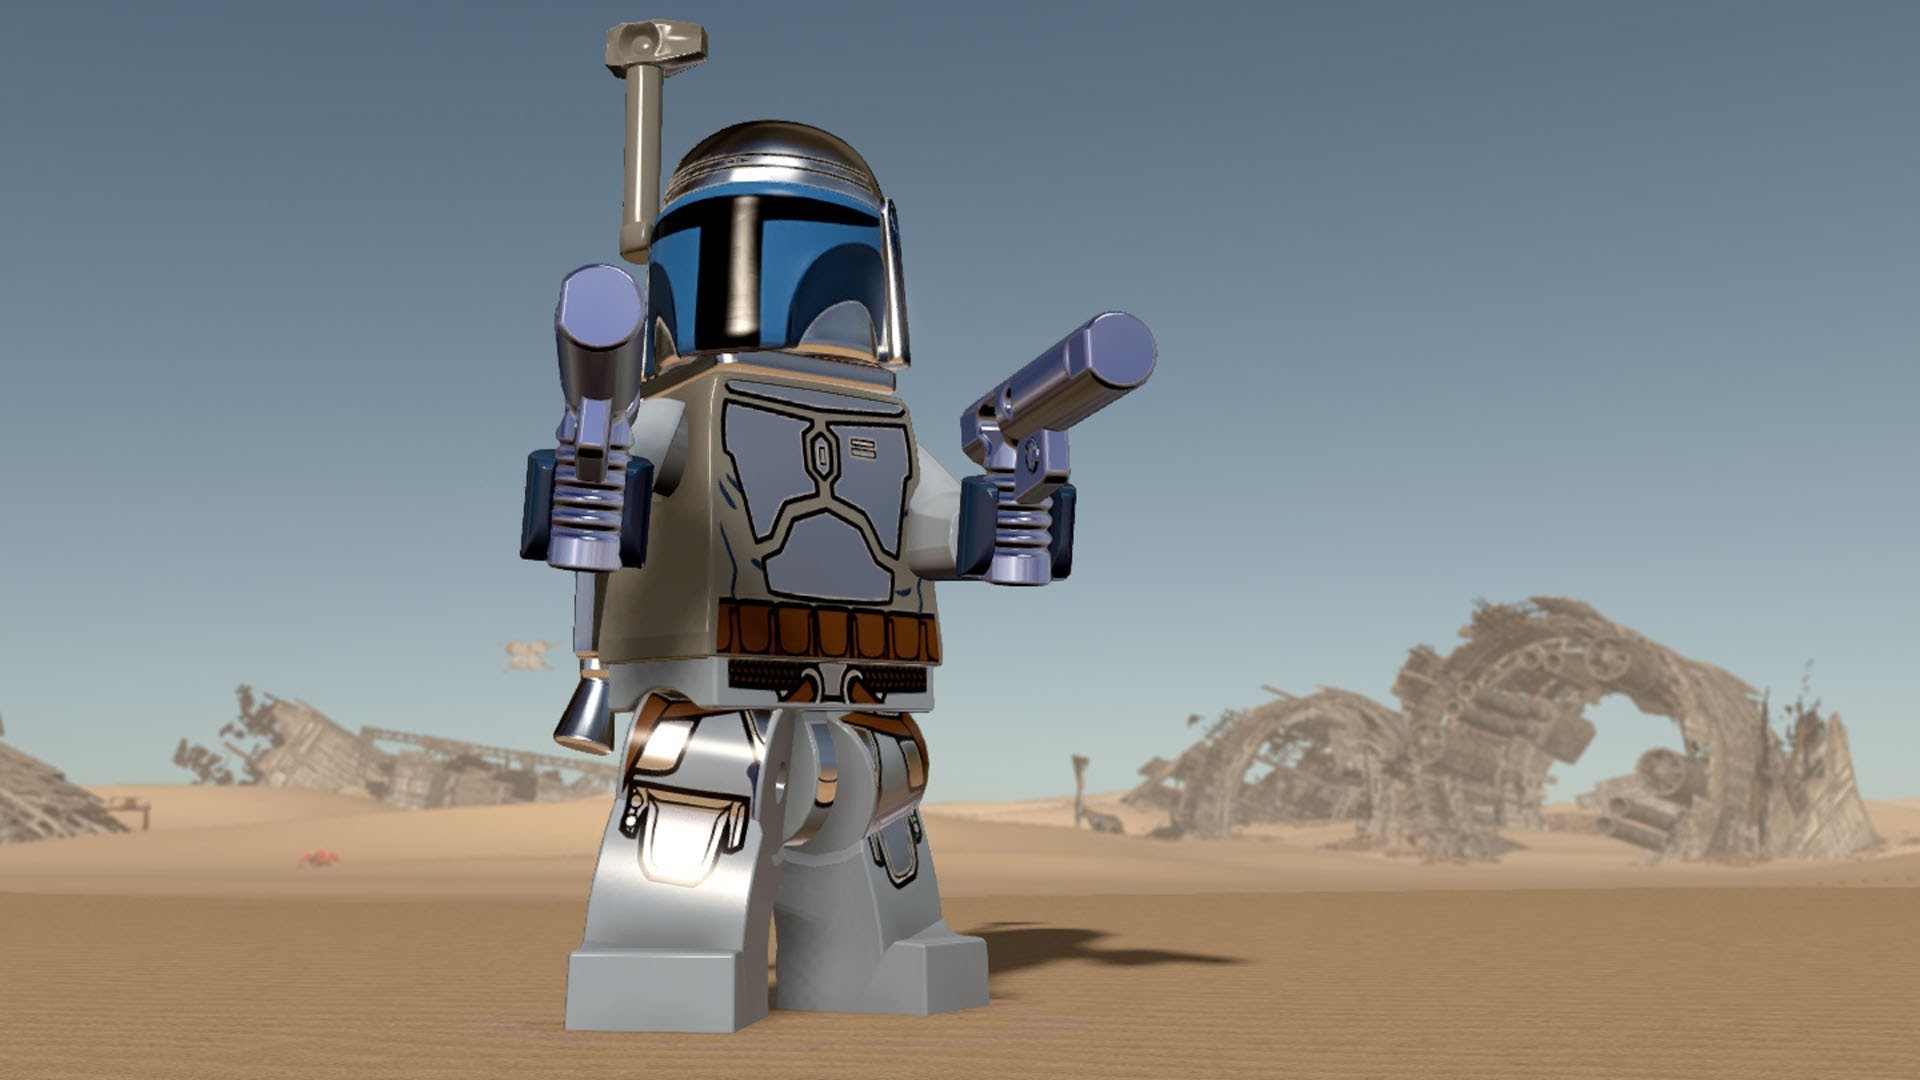 Star Wars Jango Fett Wallpaper Posted By Christopher Tremblay